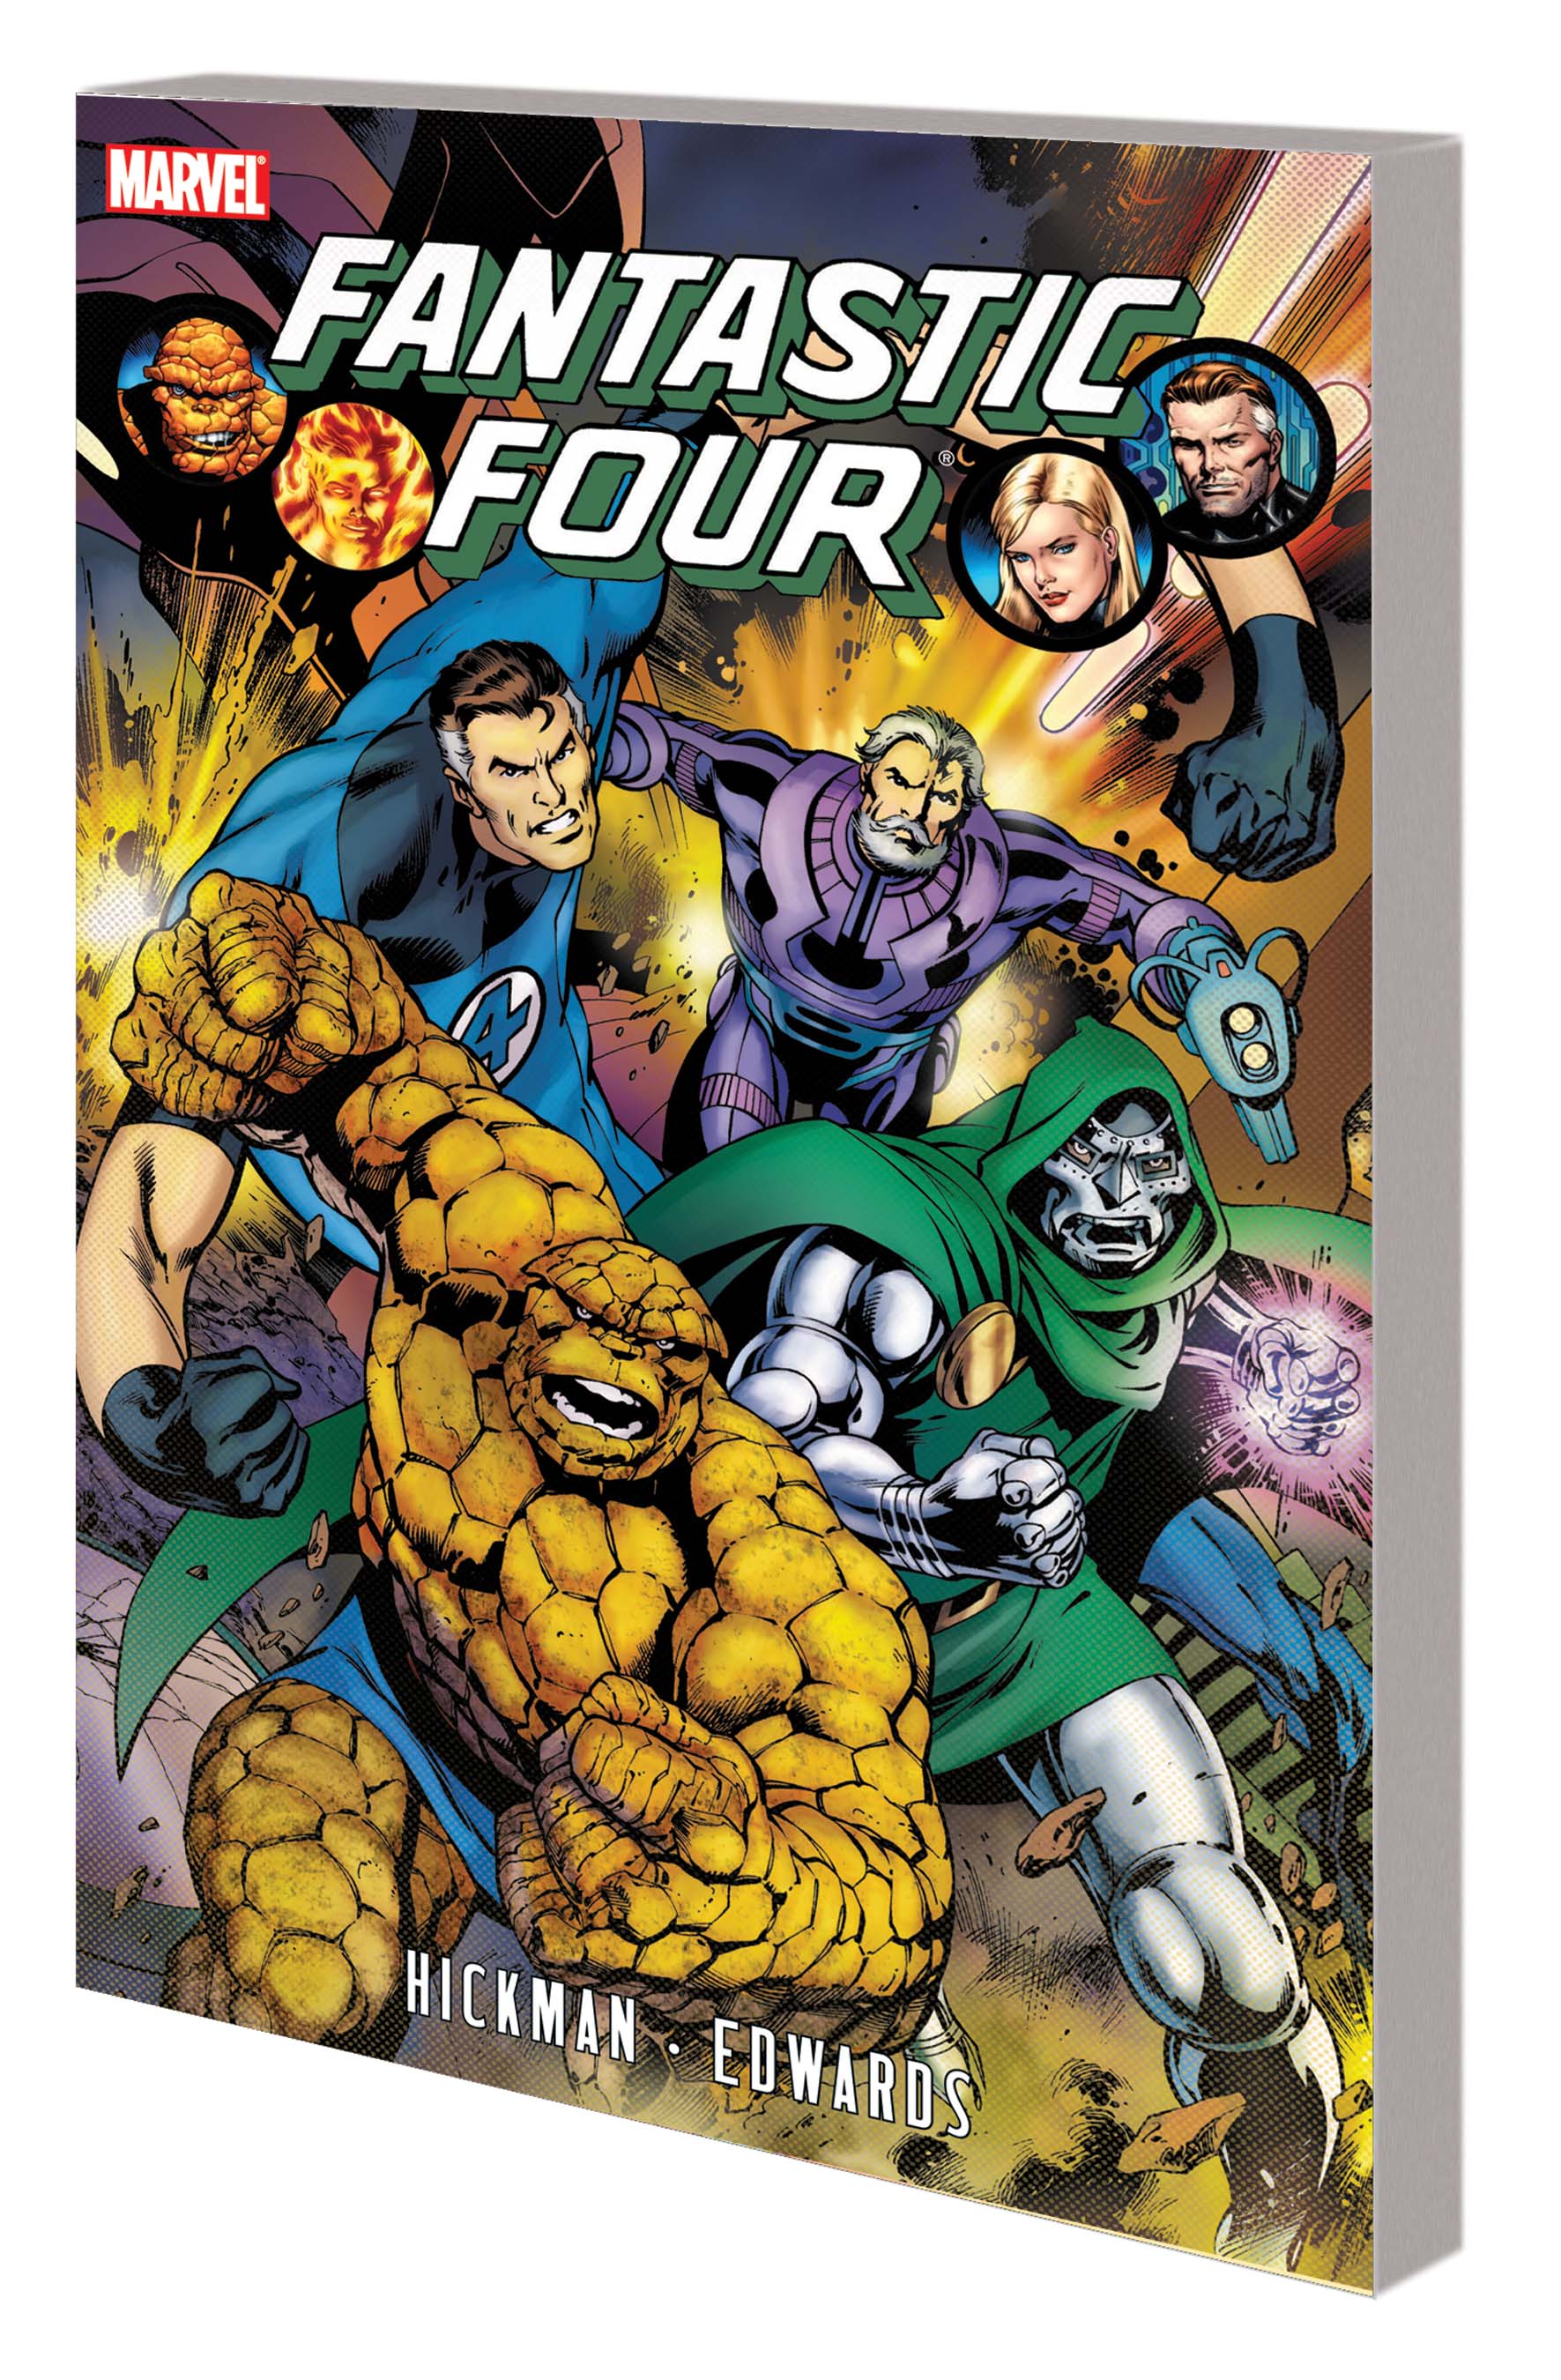 Fantastic Four by Jonathan Hickman Vol. 3 (Trade Paperback)